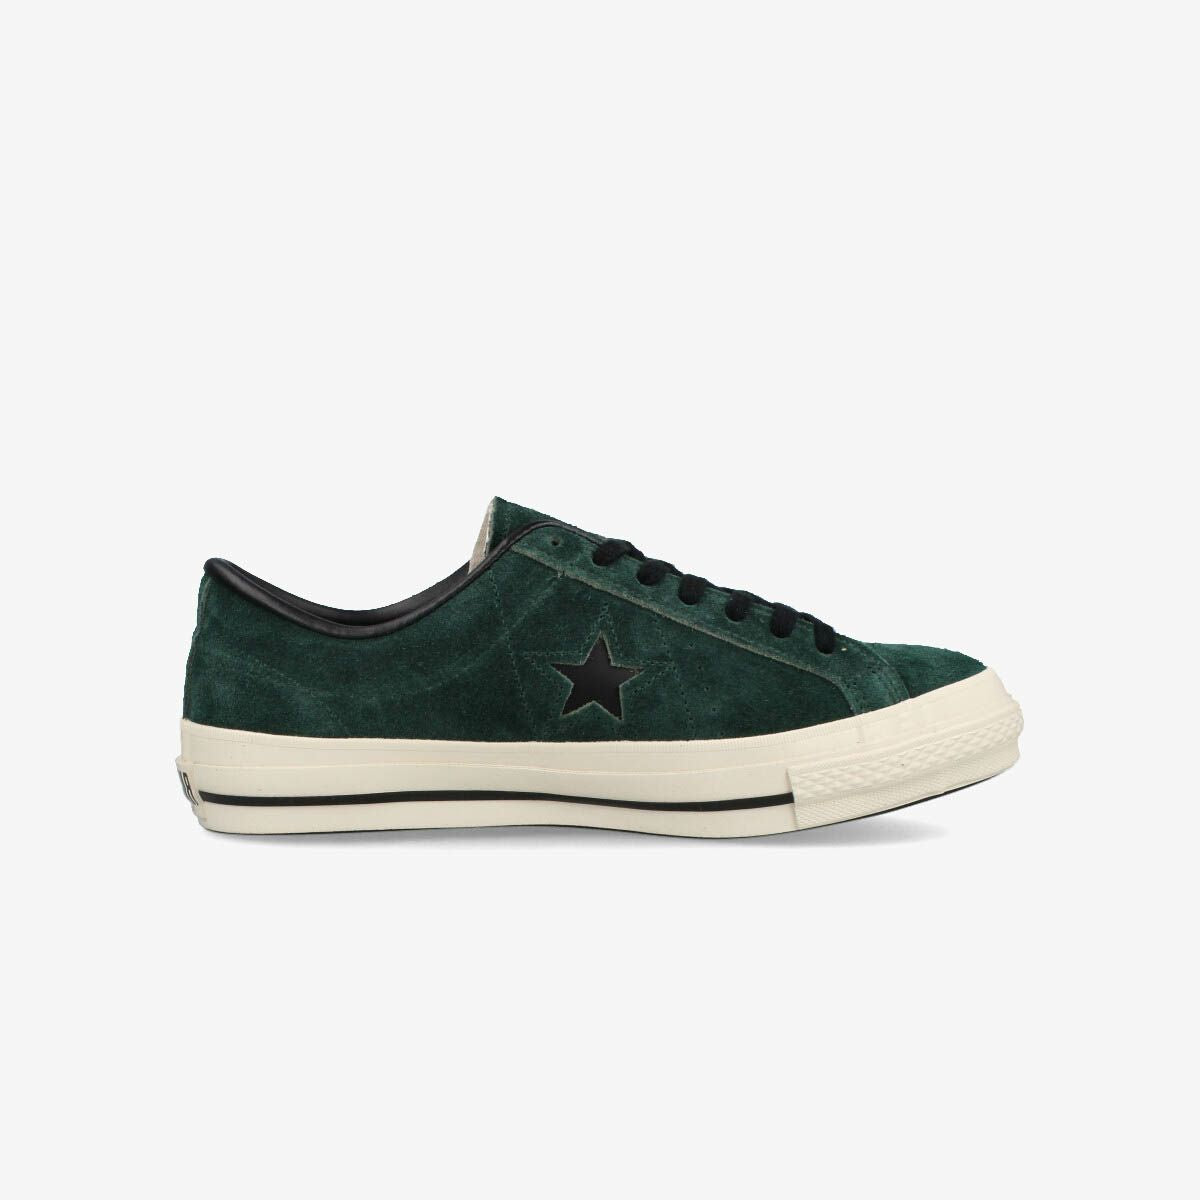 CONVERSE ONE STAR J SUEDE GREEN/BLACK 【MADE IN JAPAN】 【日本製